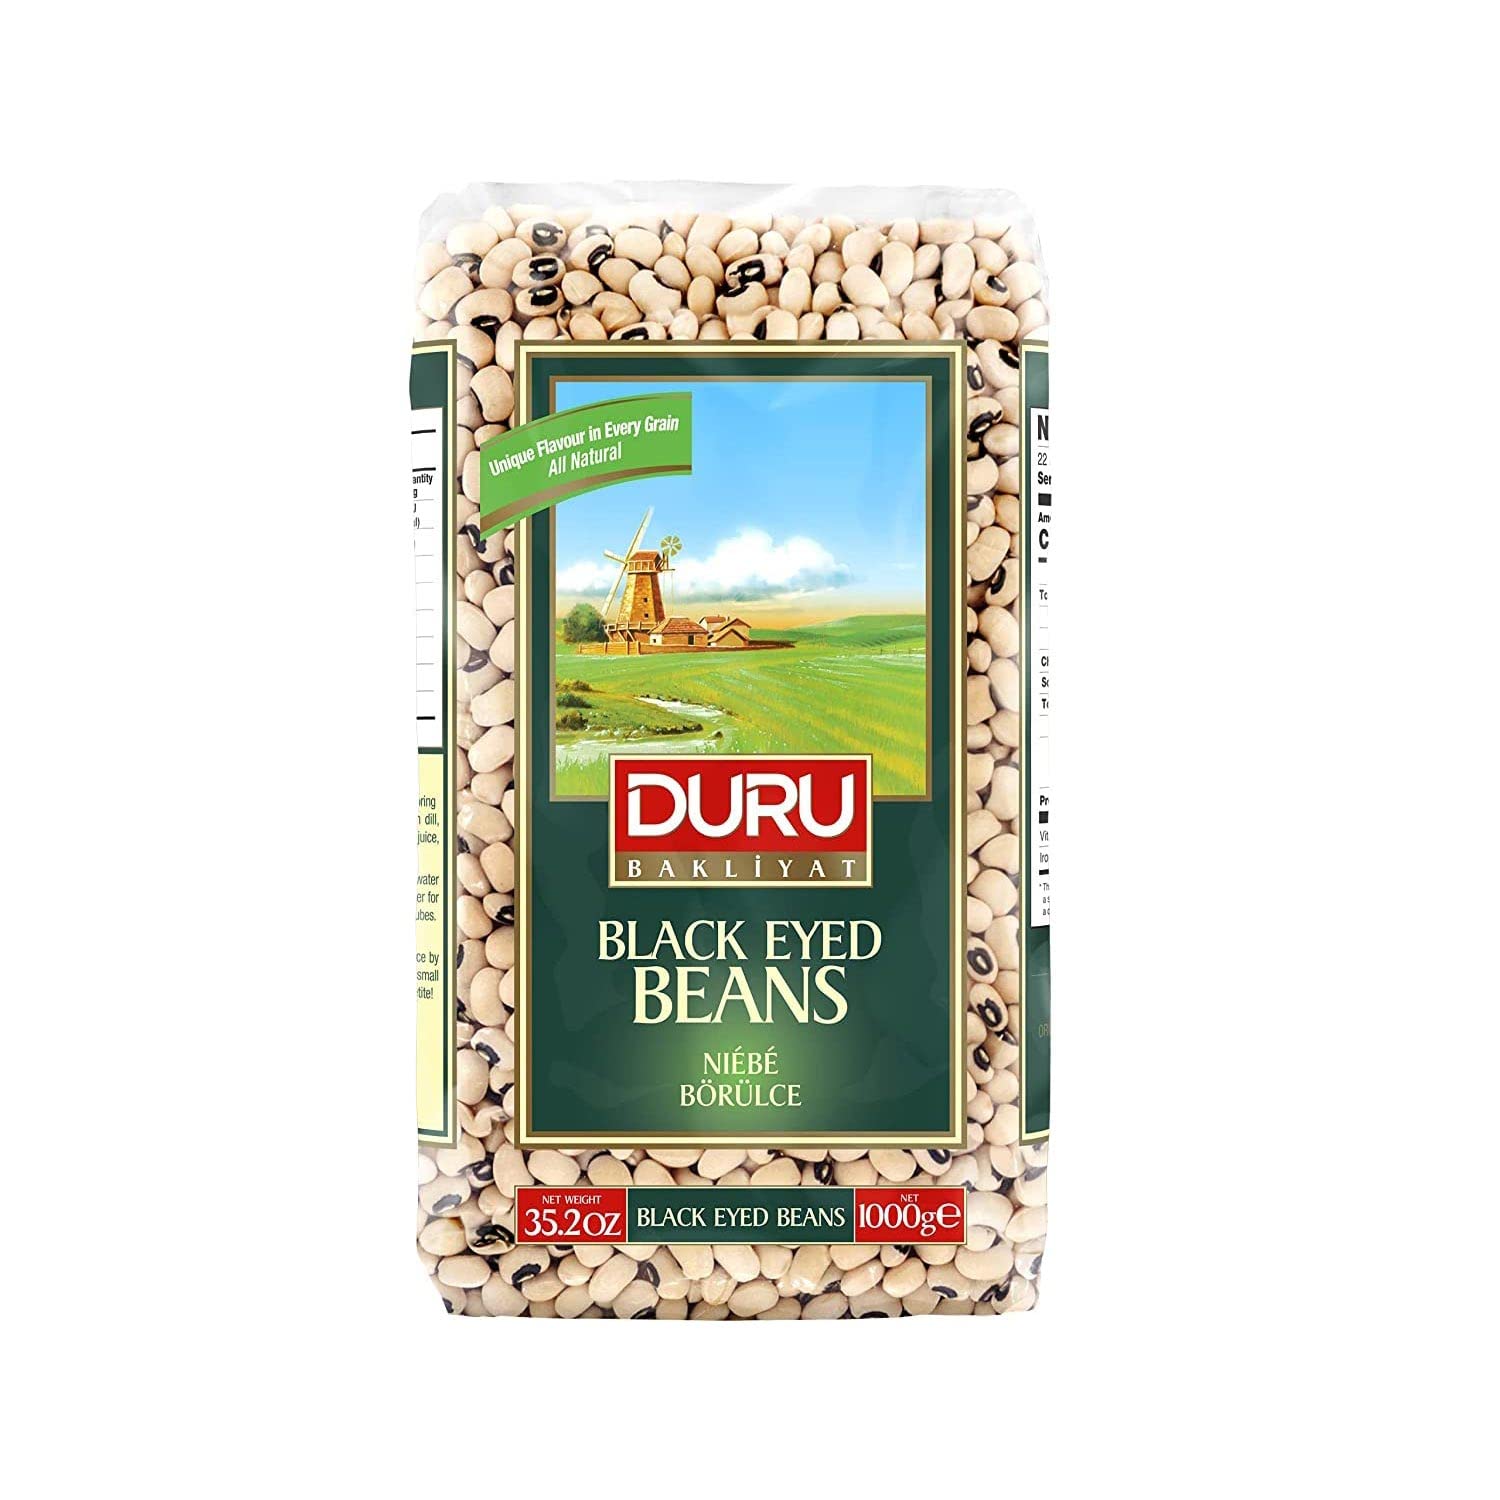 Duru Black Eyed Beans, 35.2oz (1000g), 100% Natural and Certificated, High Fiber and Protein, Non-GMO, Great for Vegan Recipes, Gluten Free